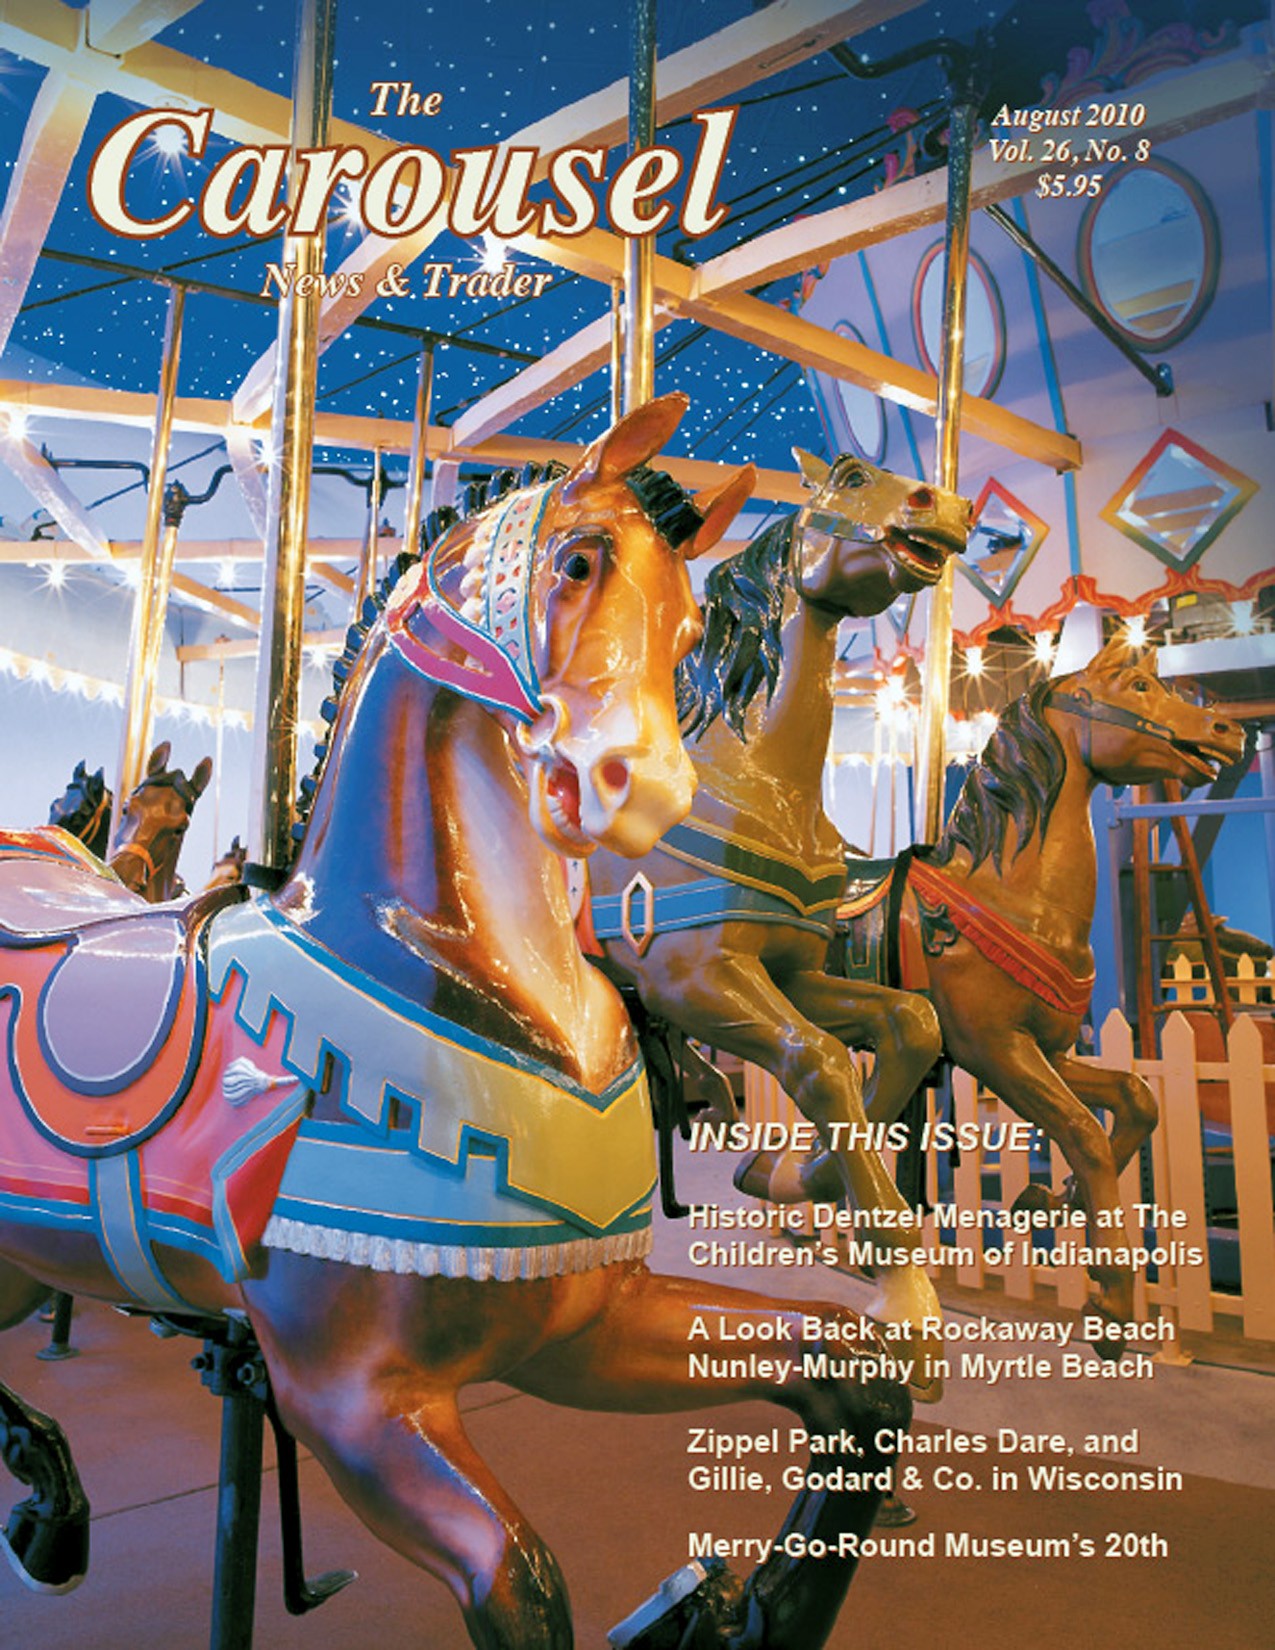 Carousel-news-cover-8-Indianapolis-Childrens-museum-carousel-August-2010